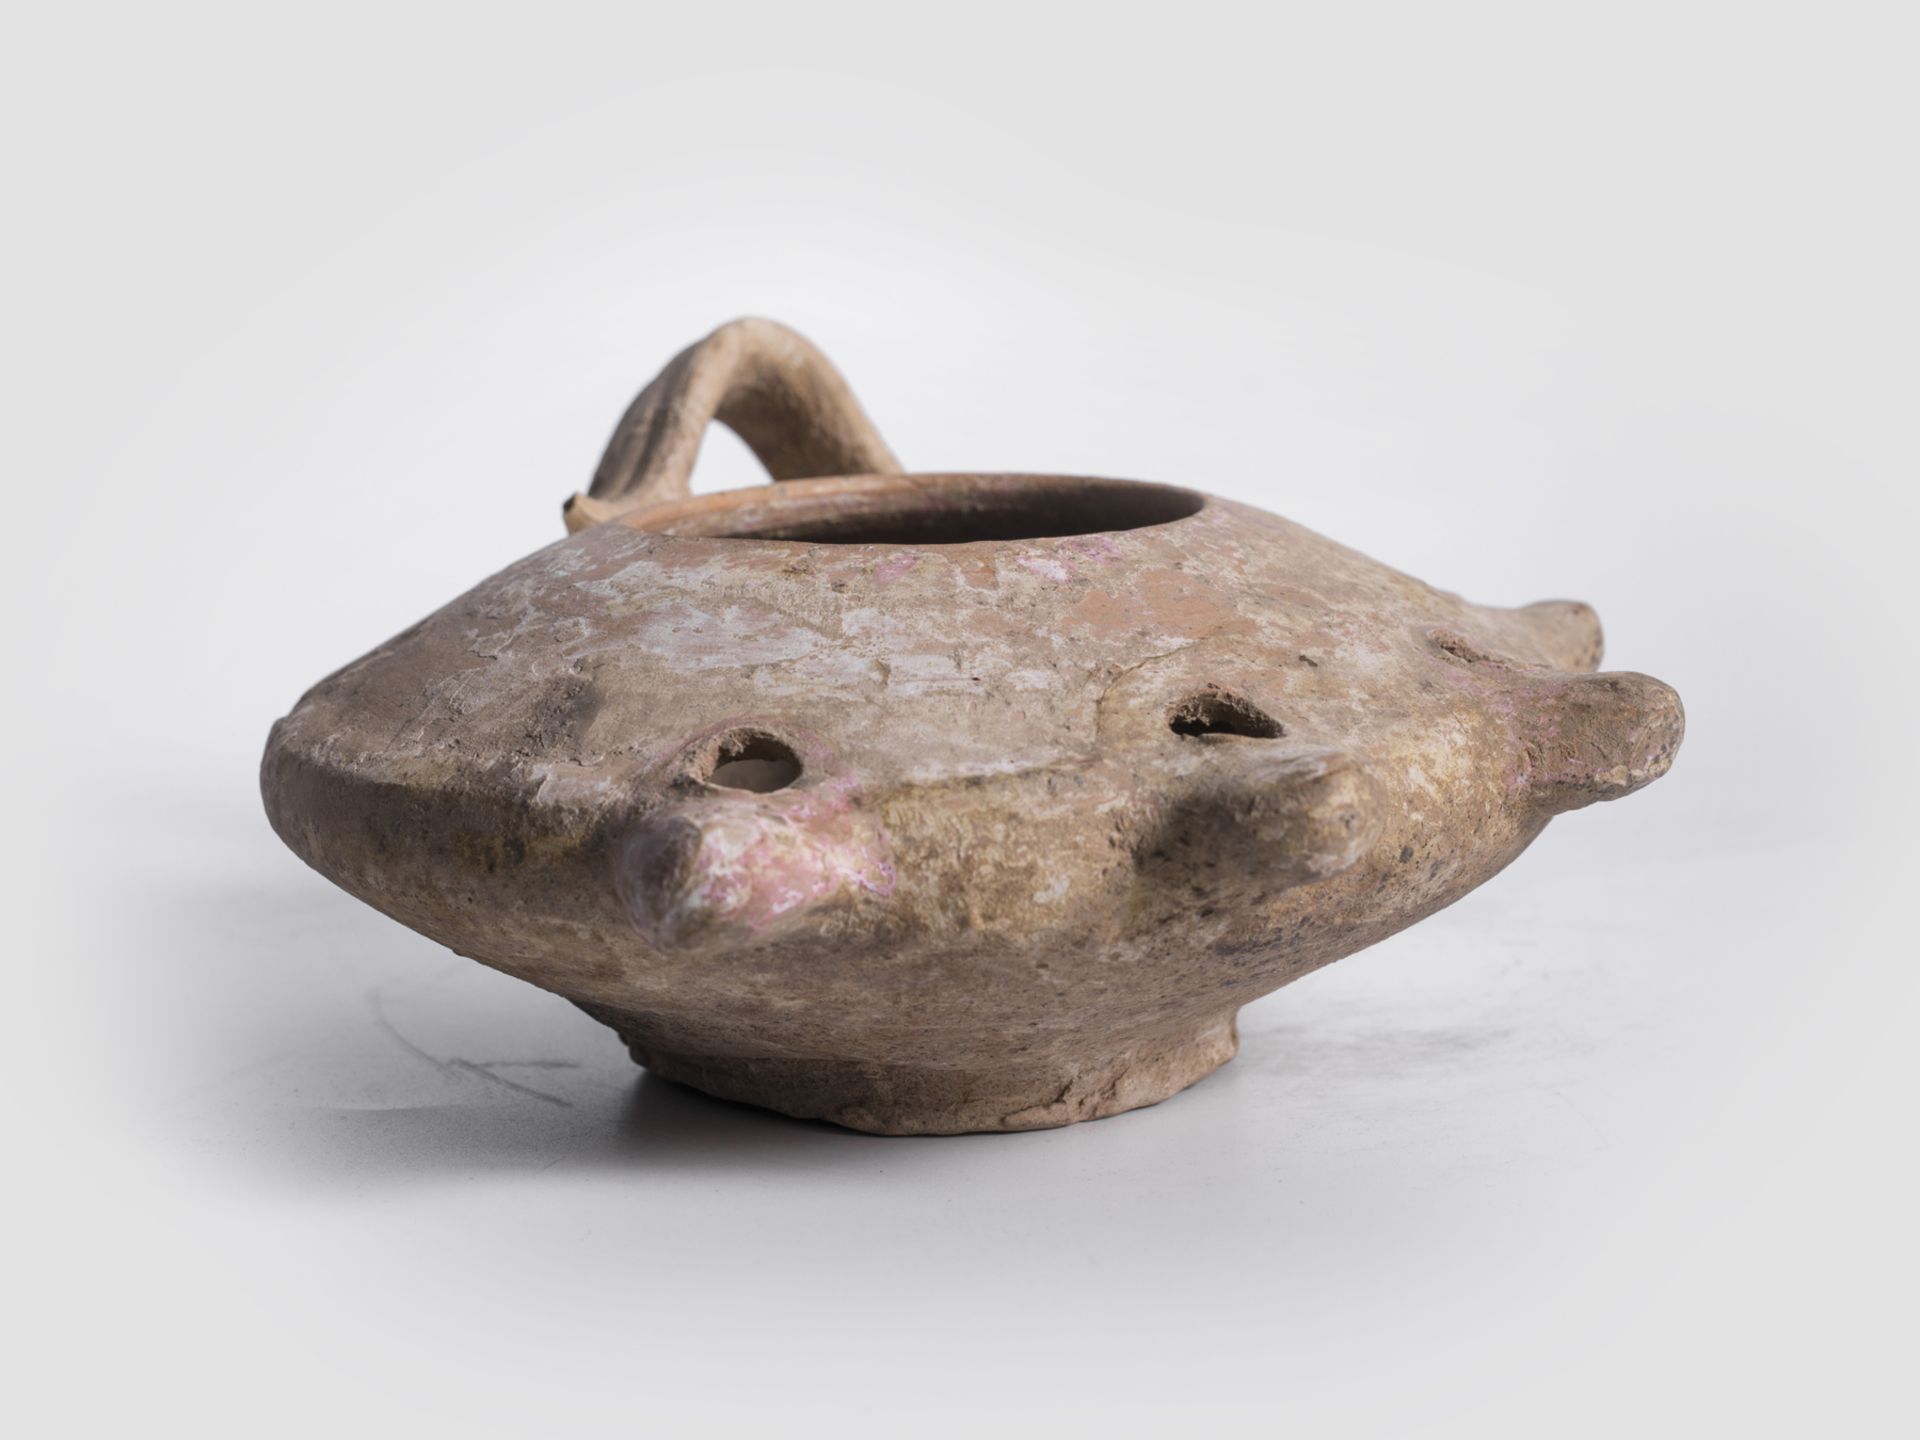 Antique oil lamp, Southern Europe or Near East, Antique, 1st - 3rd century AD - Image 4 of 6